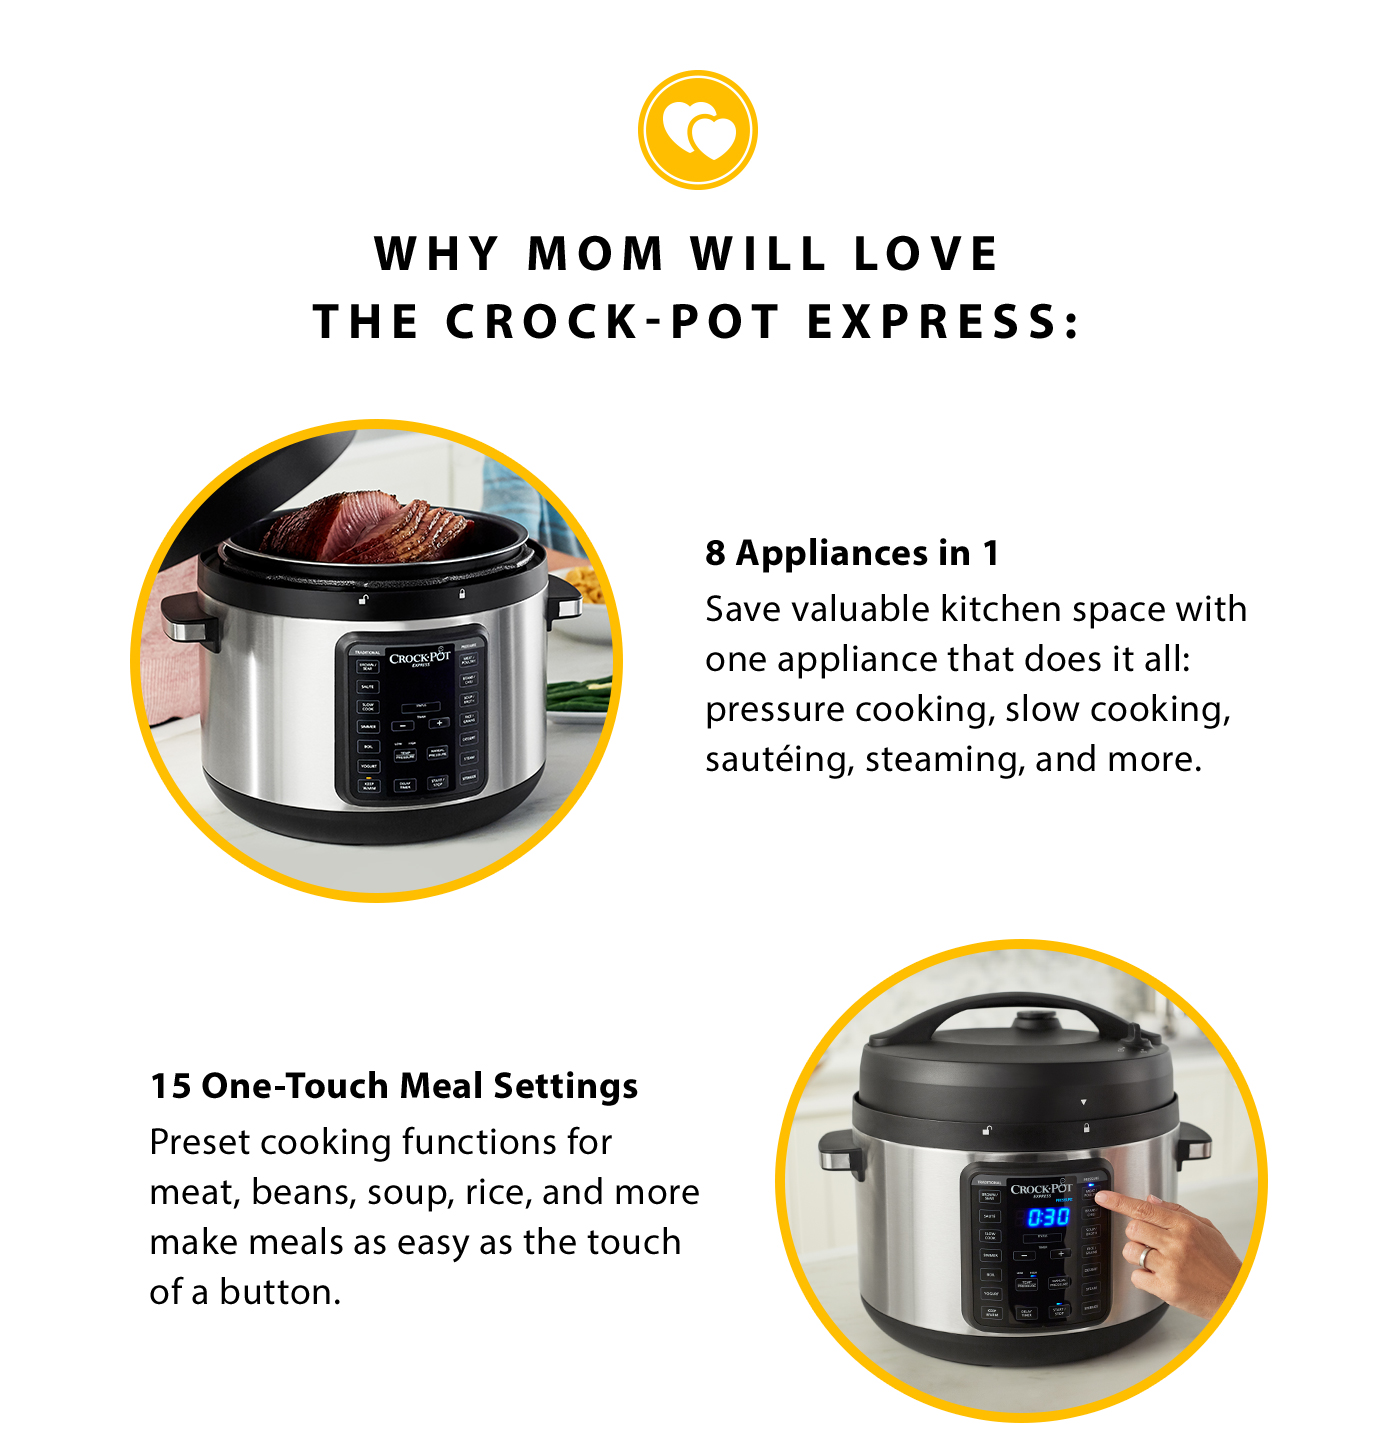 Why Mom Will Love The Crock-Pot Express: 8 Appliances in 1, 15 One-Touch Meal Settings